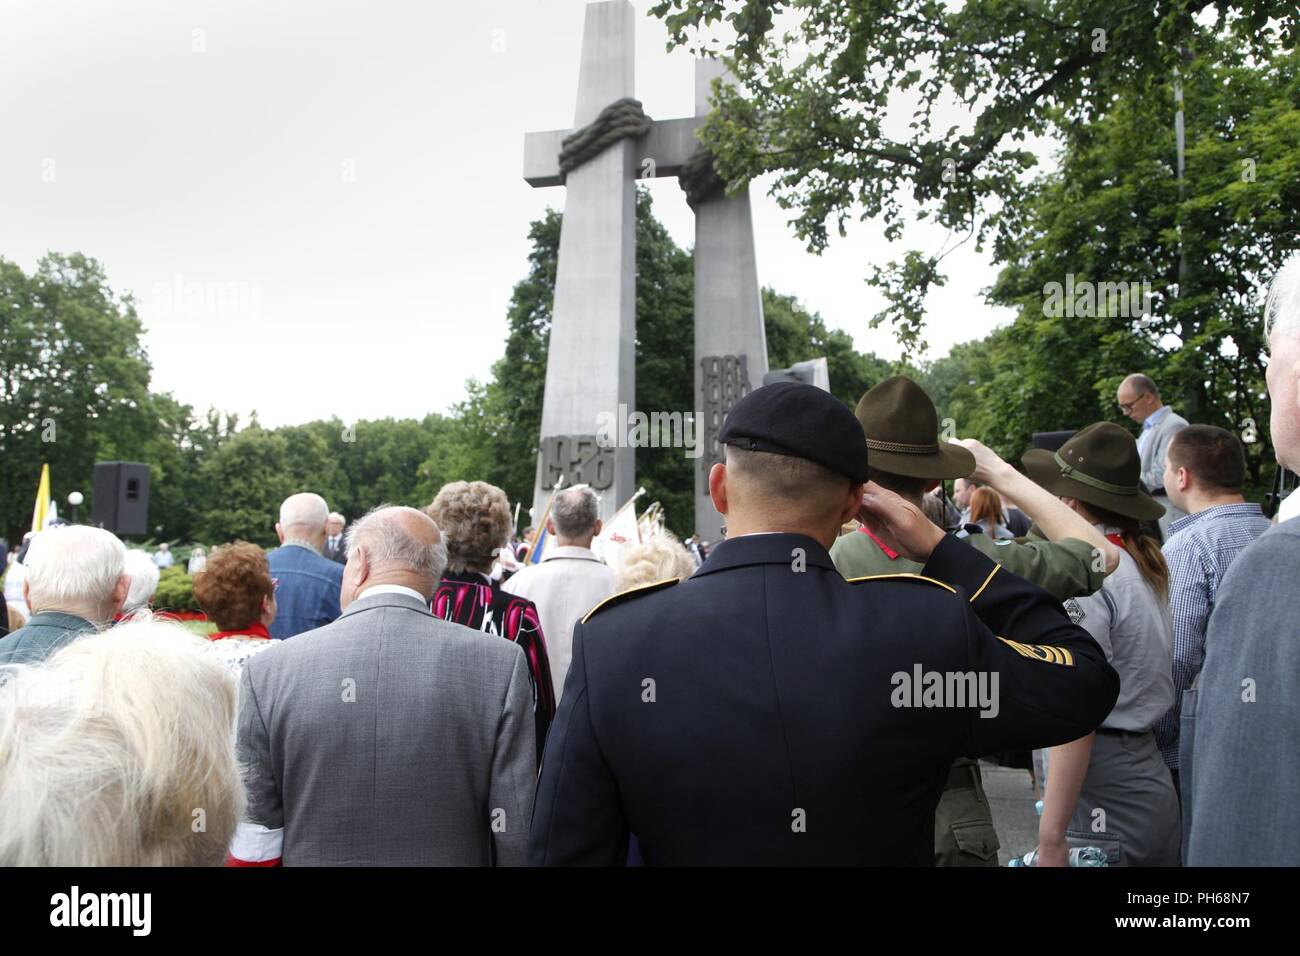 Sergeant Maj. Sael Garcia, 1st Infantry Division Mission Command Element sergeant major, salutes during the Polish national anthem at the start of a ceremony in commemoration of the 1956 Poznań Uprising June 28, 2018, at the Crosses monument in Poznań, Poland, which stands in honor of the Polish citizens who stood up against communist rule 62 years ago. The massive protests in 1956 were the first of many in which hundreds of Polish people sacrificed their lives for the independence of Poland. Hundreds of Polish citizens, including uprising participants, attended the ceremony. Also in attendanc Stock Photo